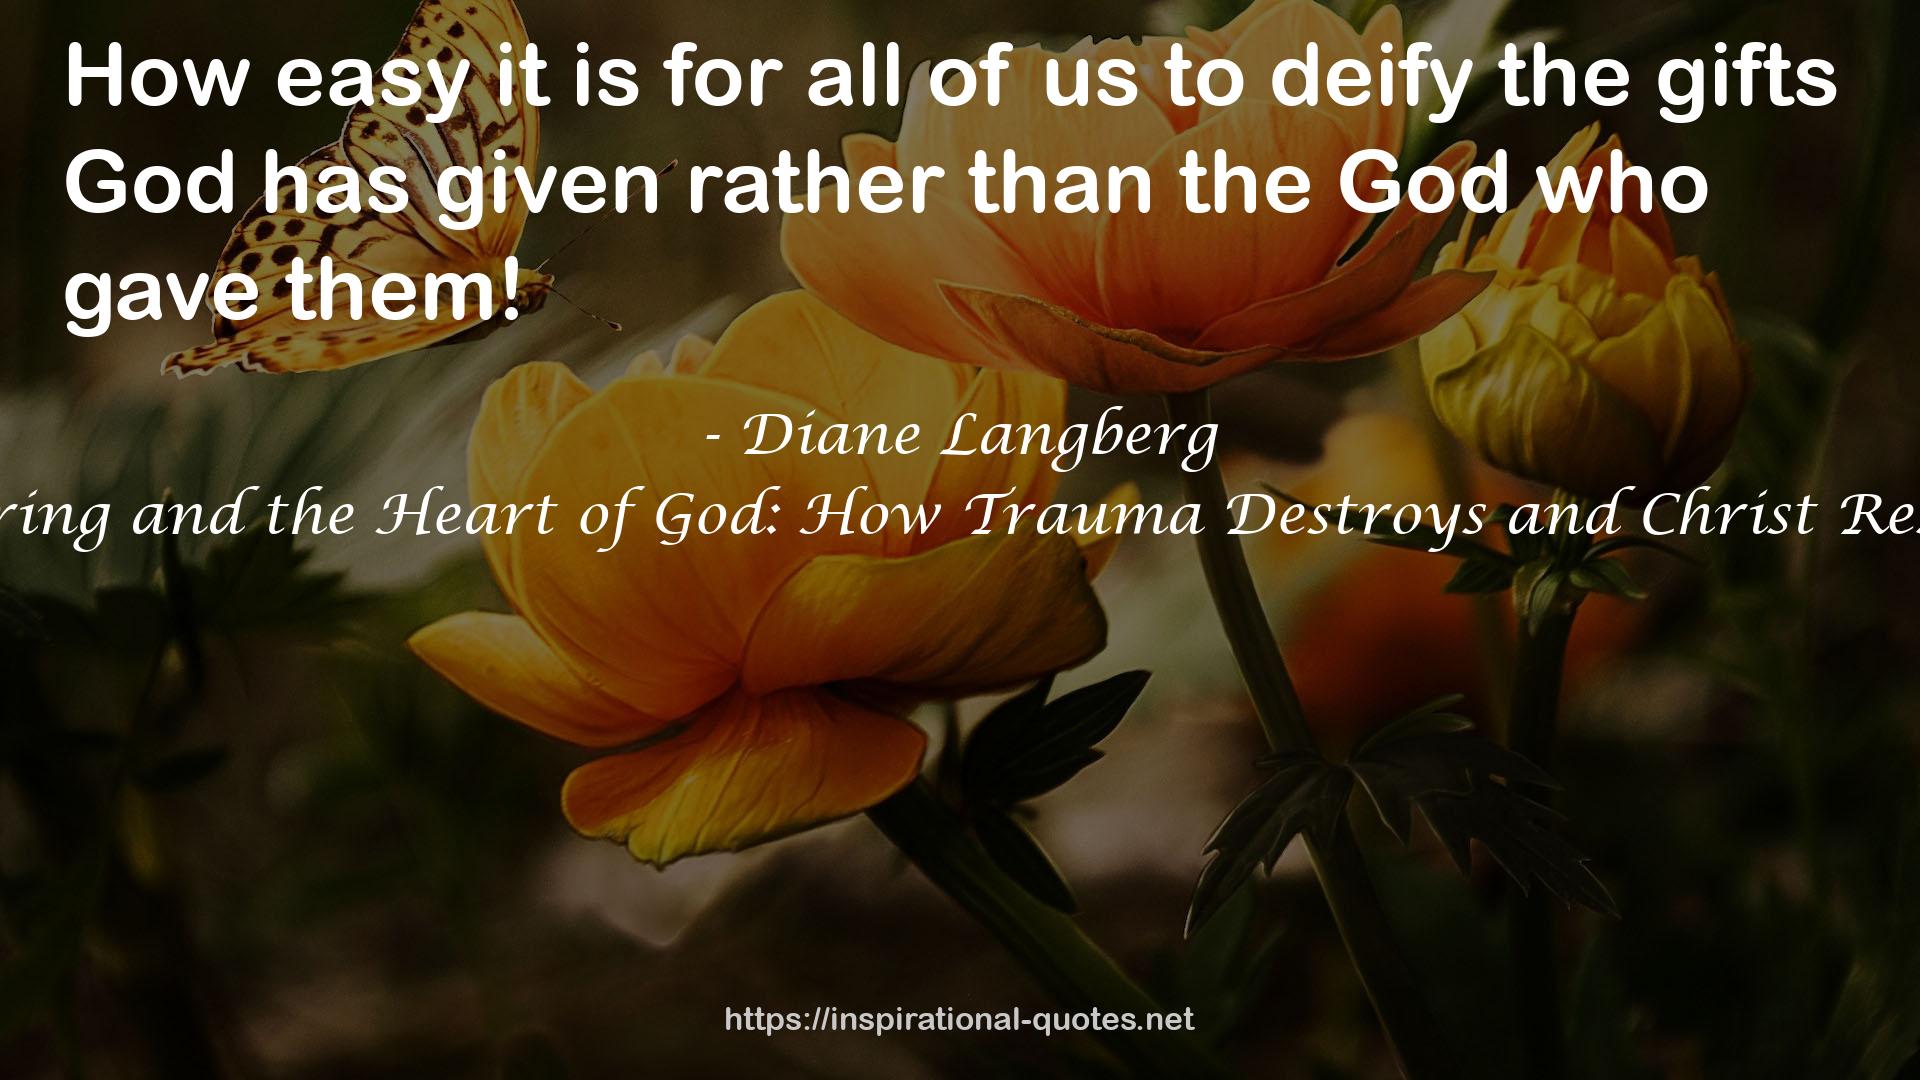 Suffering and the Heart of God: How Trauma Destroys and Christ Restores QUOTES